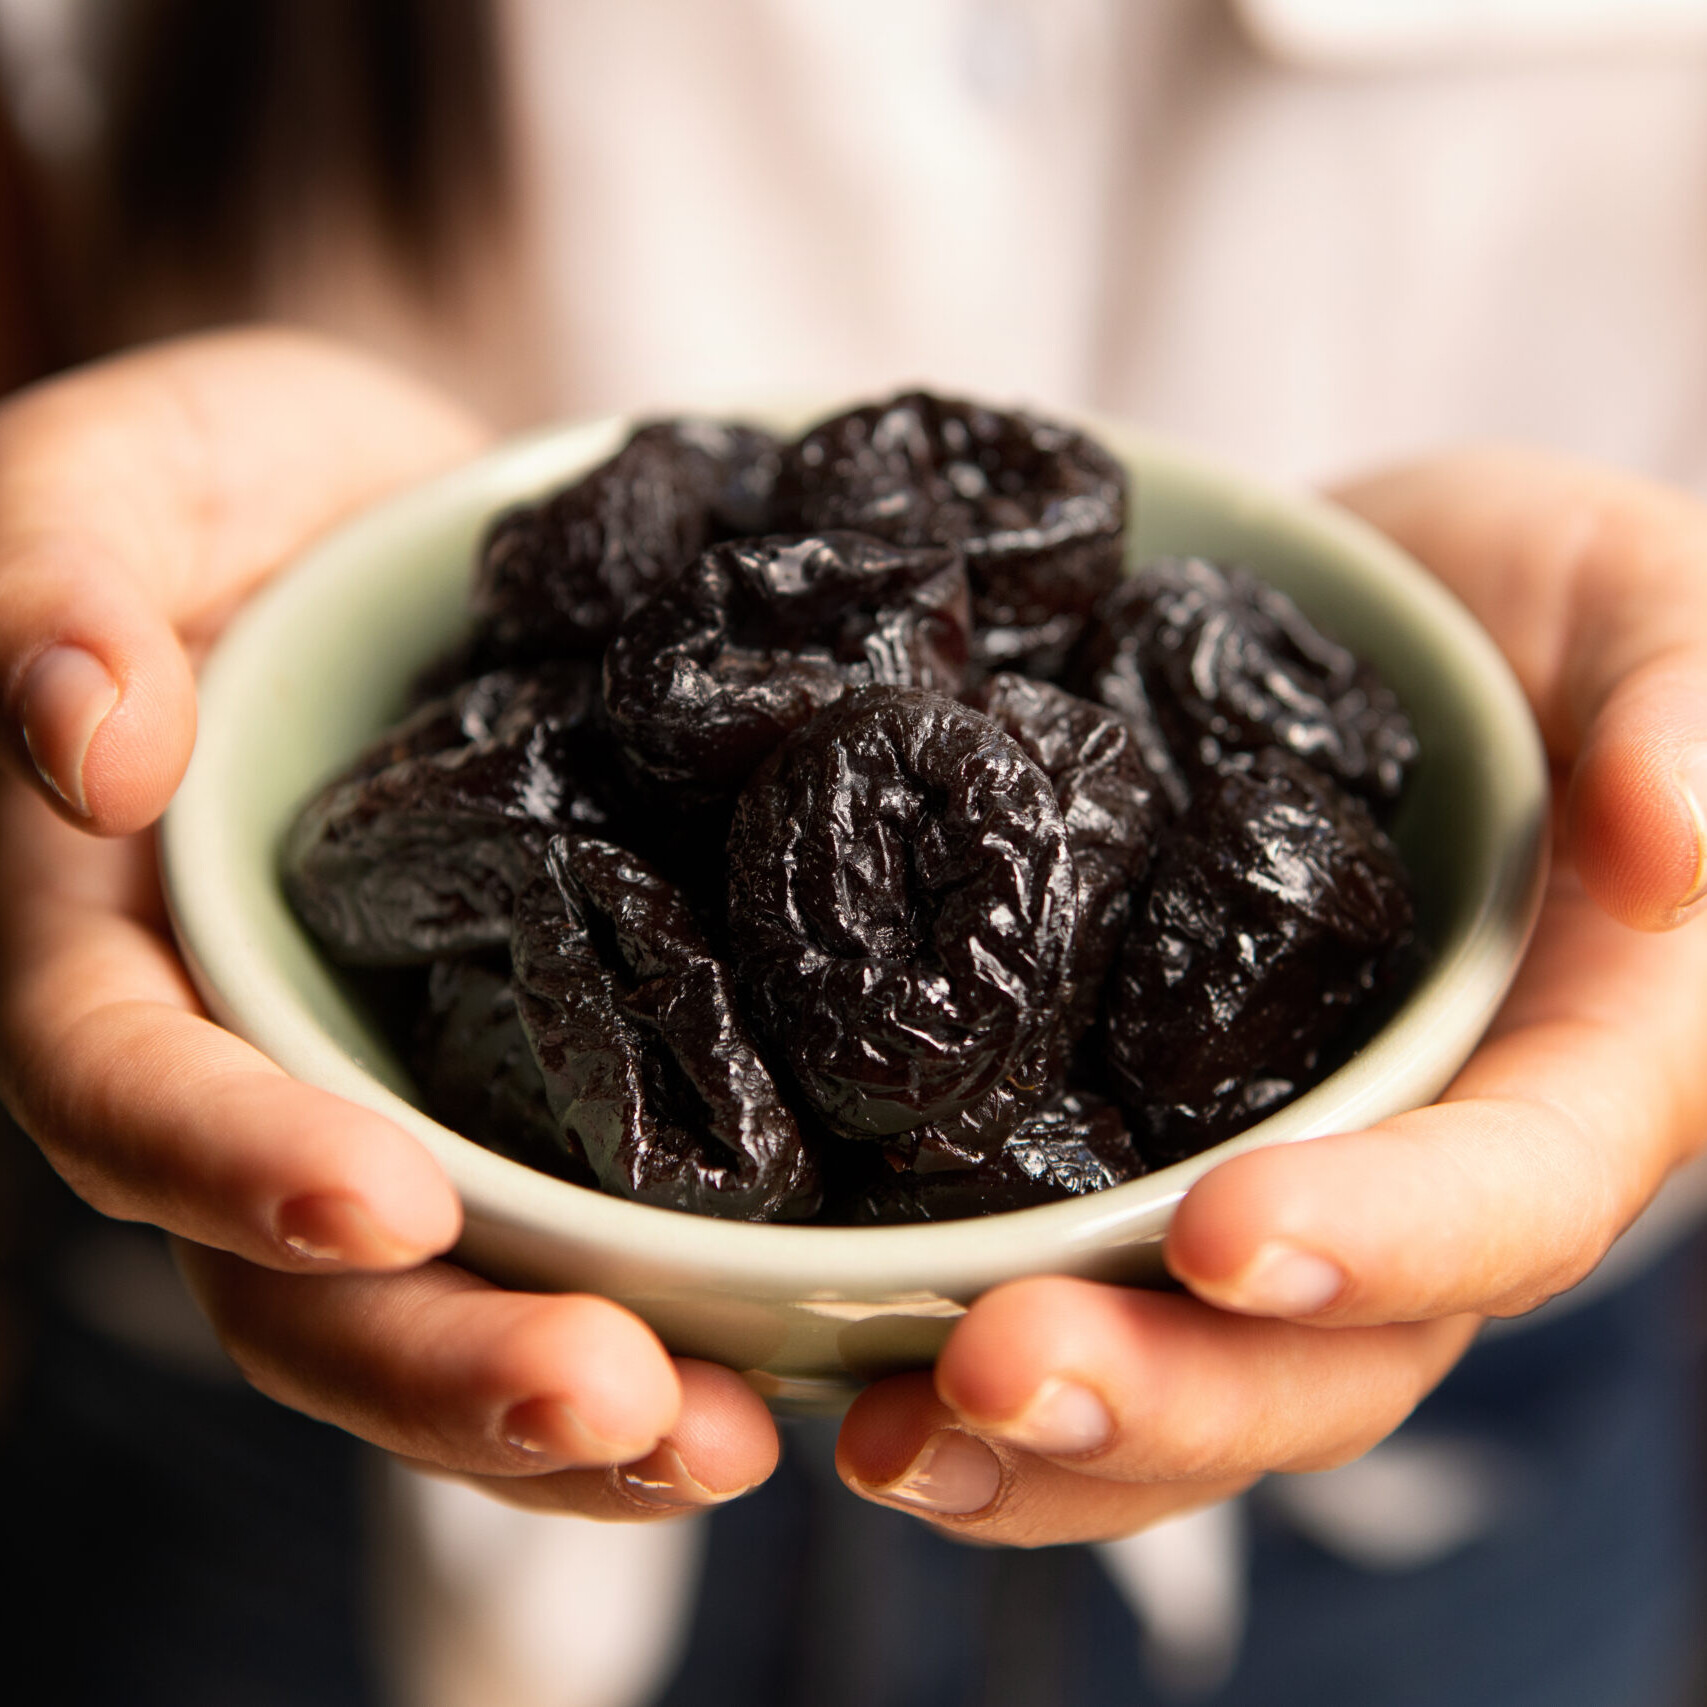 prunes may preserve bone health - two hands holding a small bowl of prunes